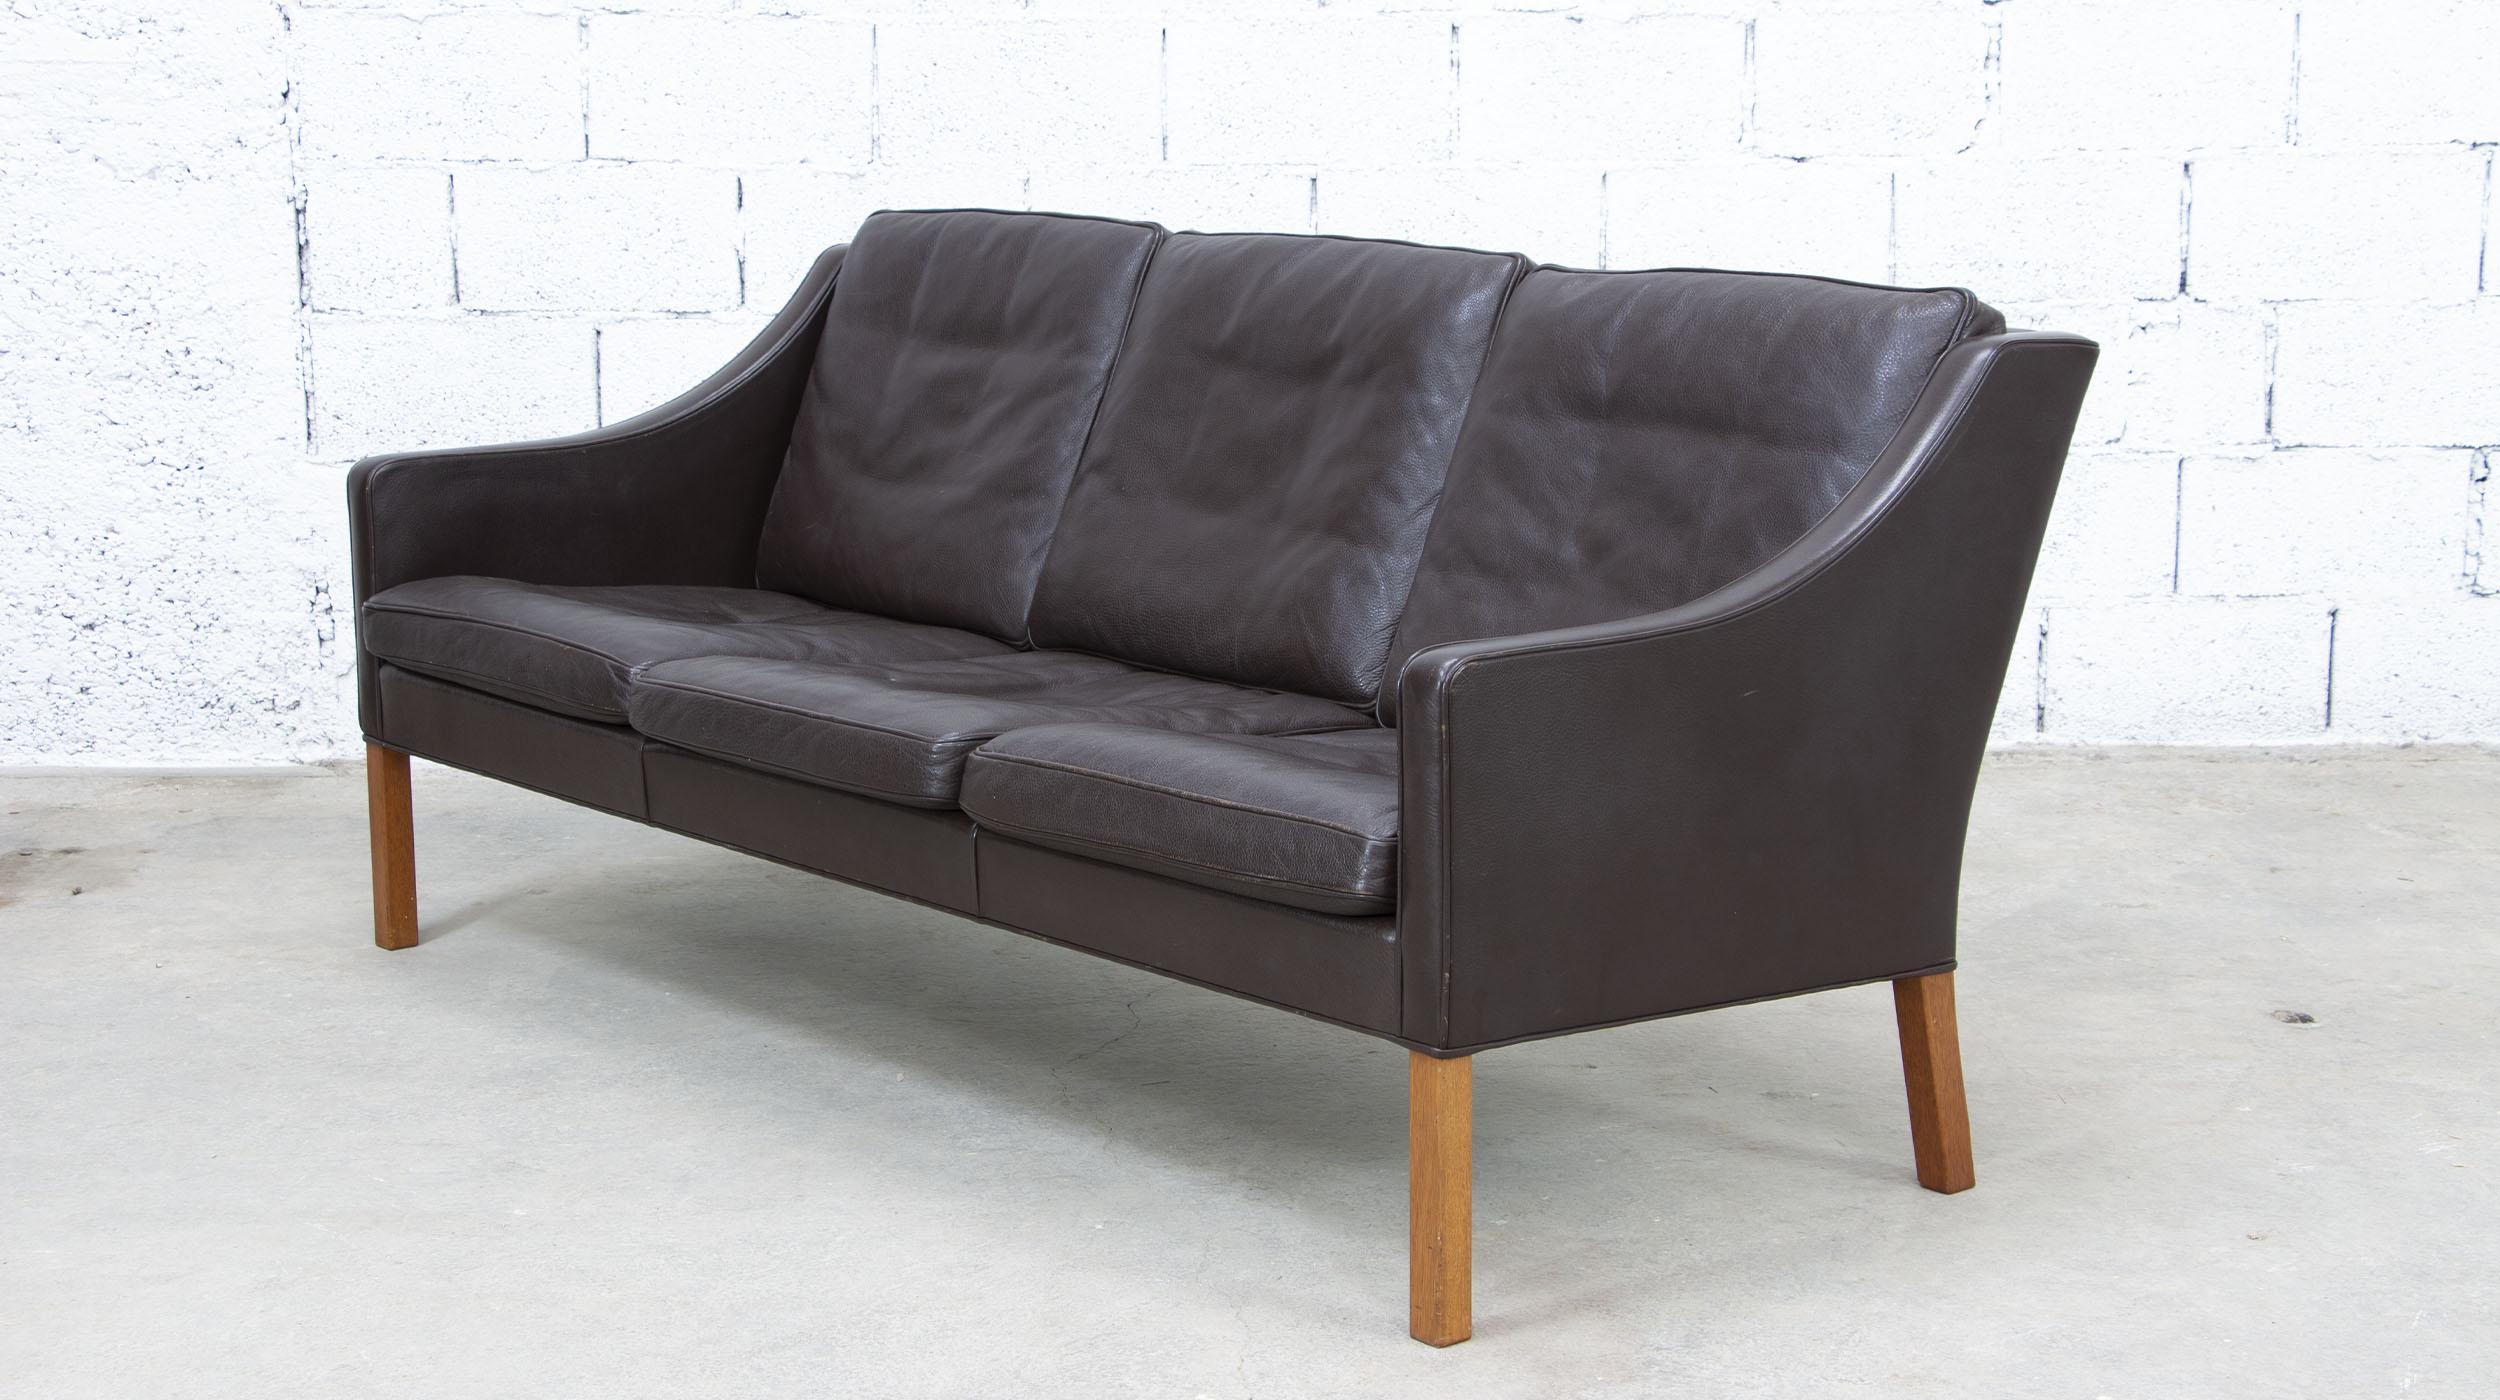 Danish sofa designed by Borge Mogensen produced by Fredericia Furniture. Model 2209. 3 seats. Teak base. Sofa emblematic of Danish furniture since the 60s with its materials of exceptional quality made by the excellence of the crafts of leather and